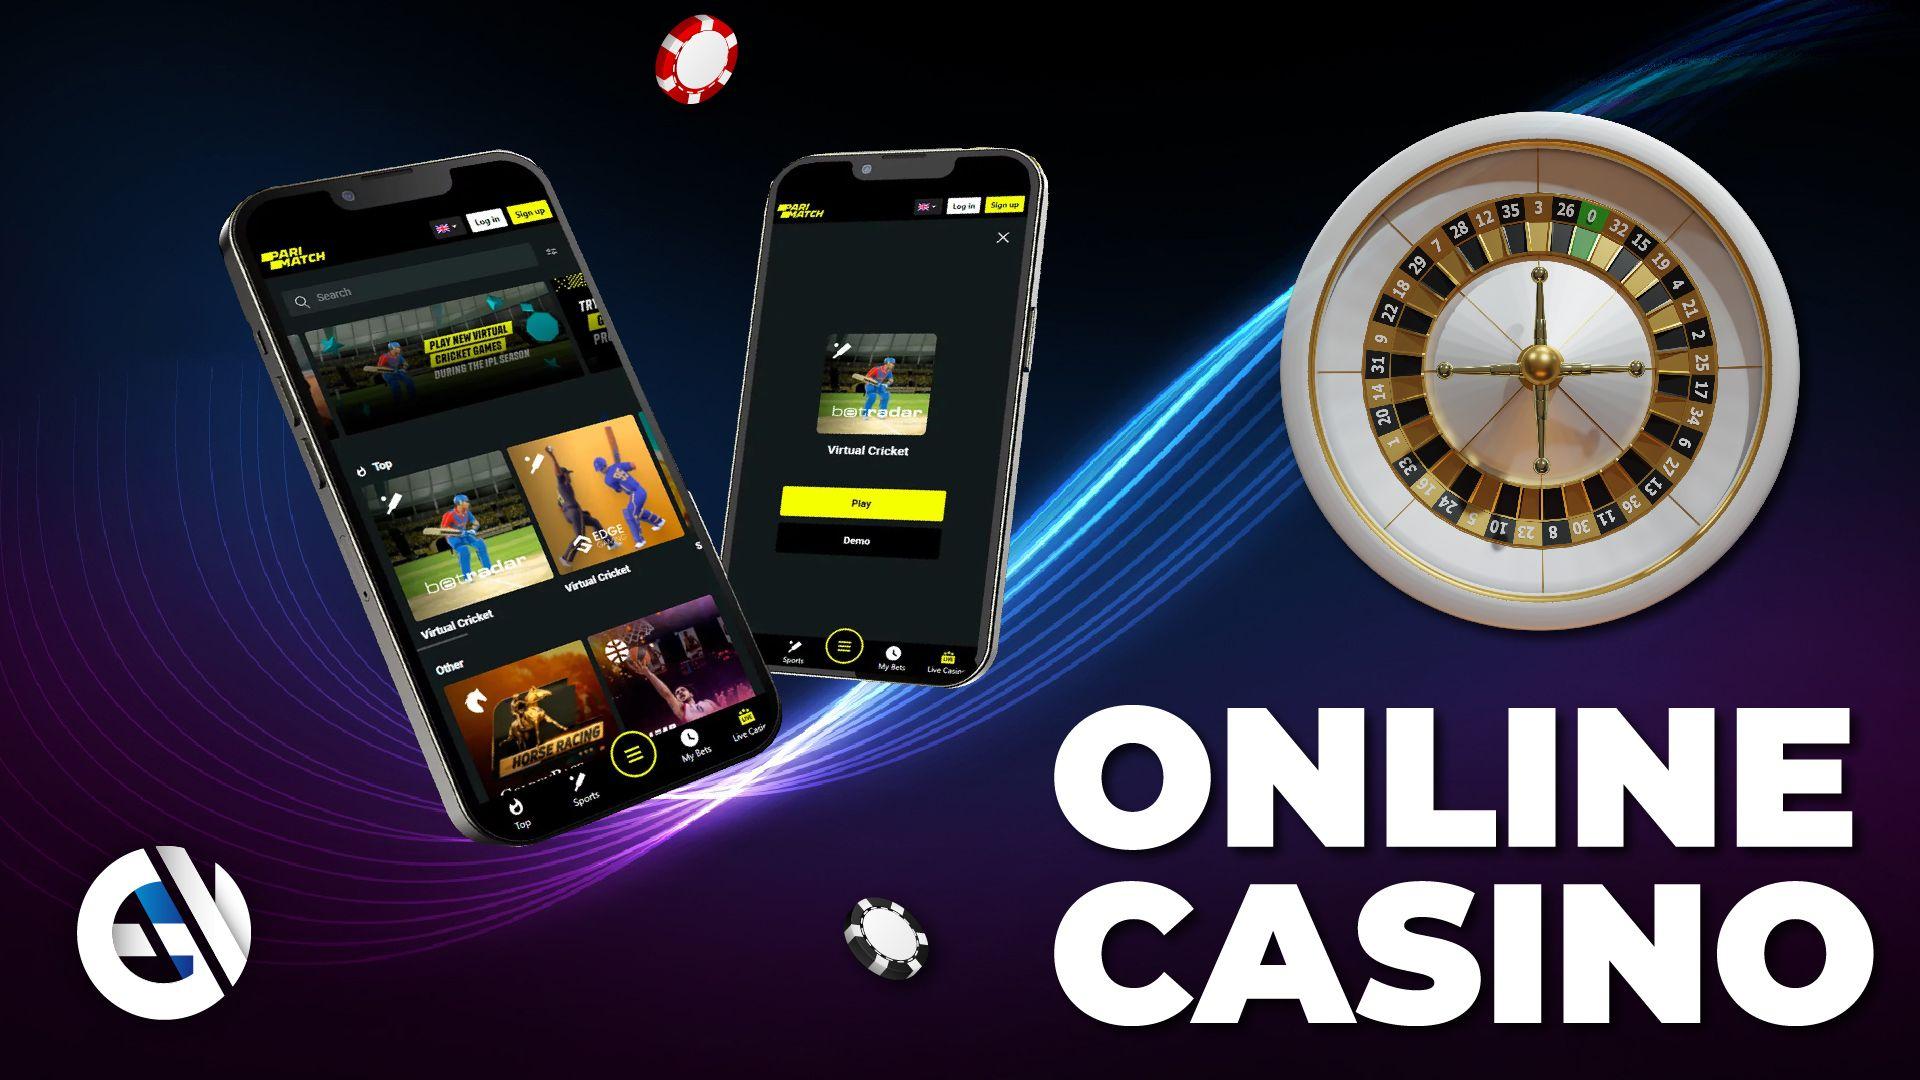 Advantages of logging into Parimatch online casino through the app and the benefits of proper registration